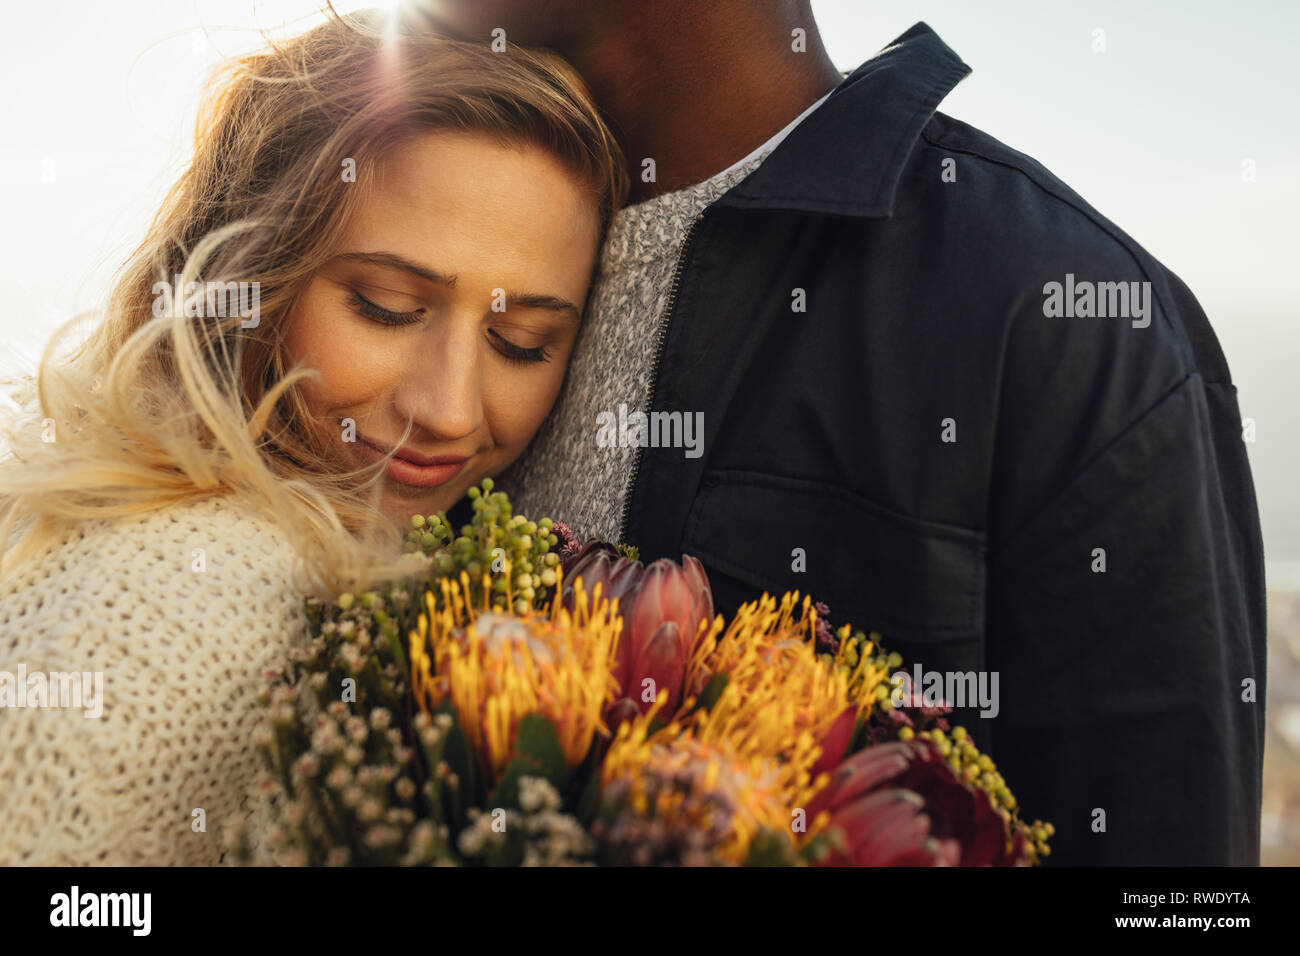 Young woman hugging her boyfriend with flowers. Woman embracing her man with love. Stock Photo